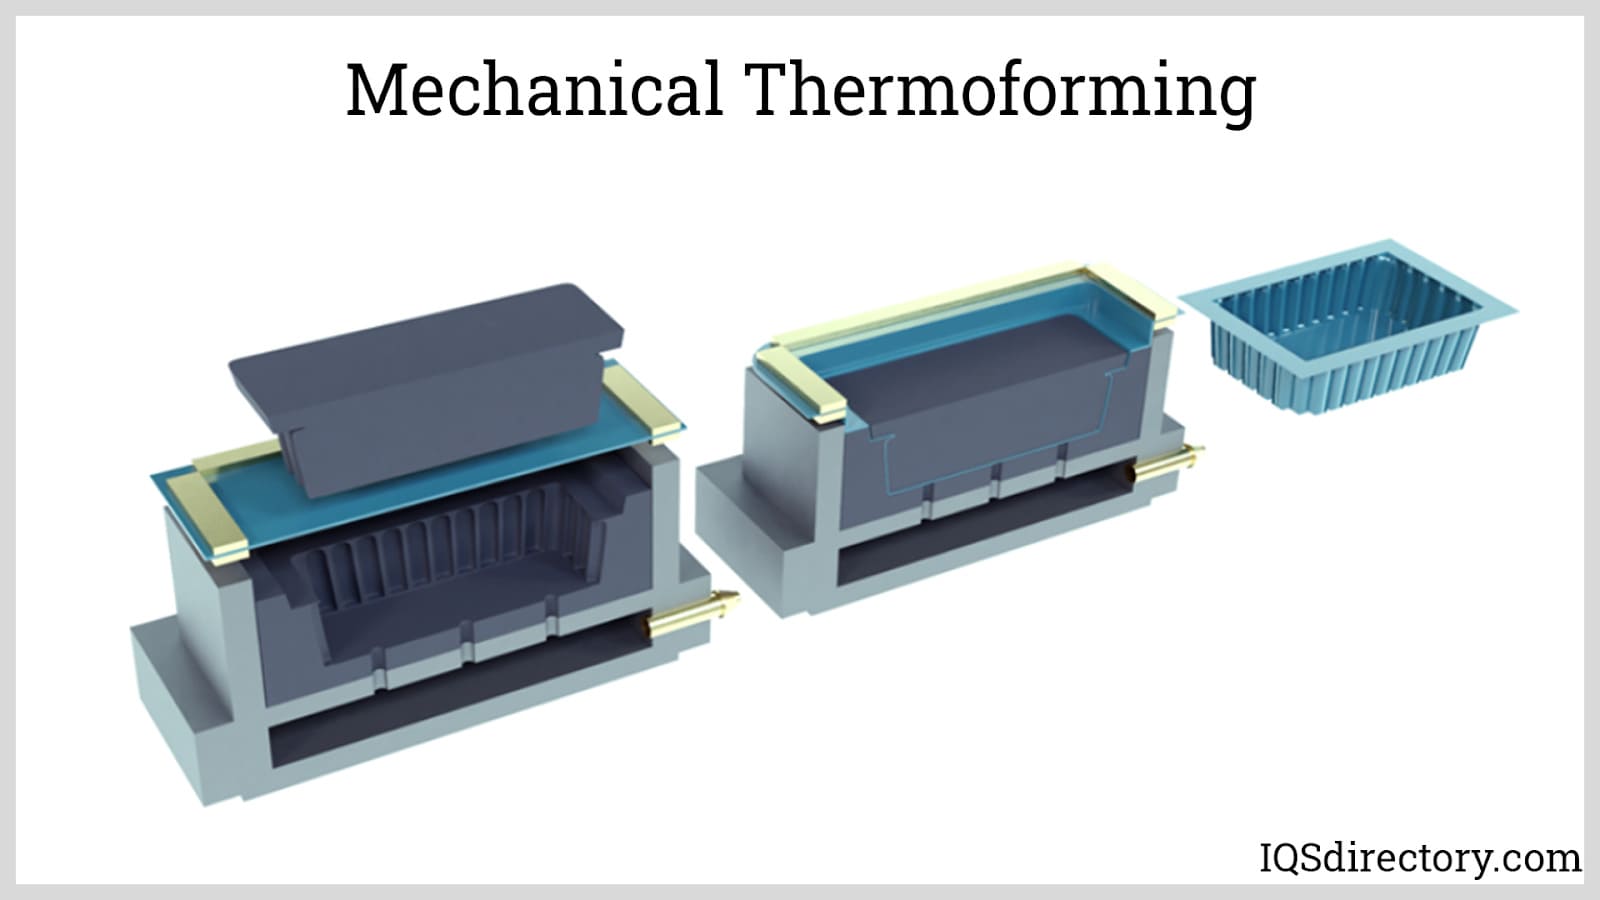 Mechanical Thermoforming